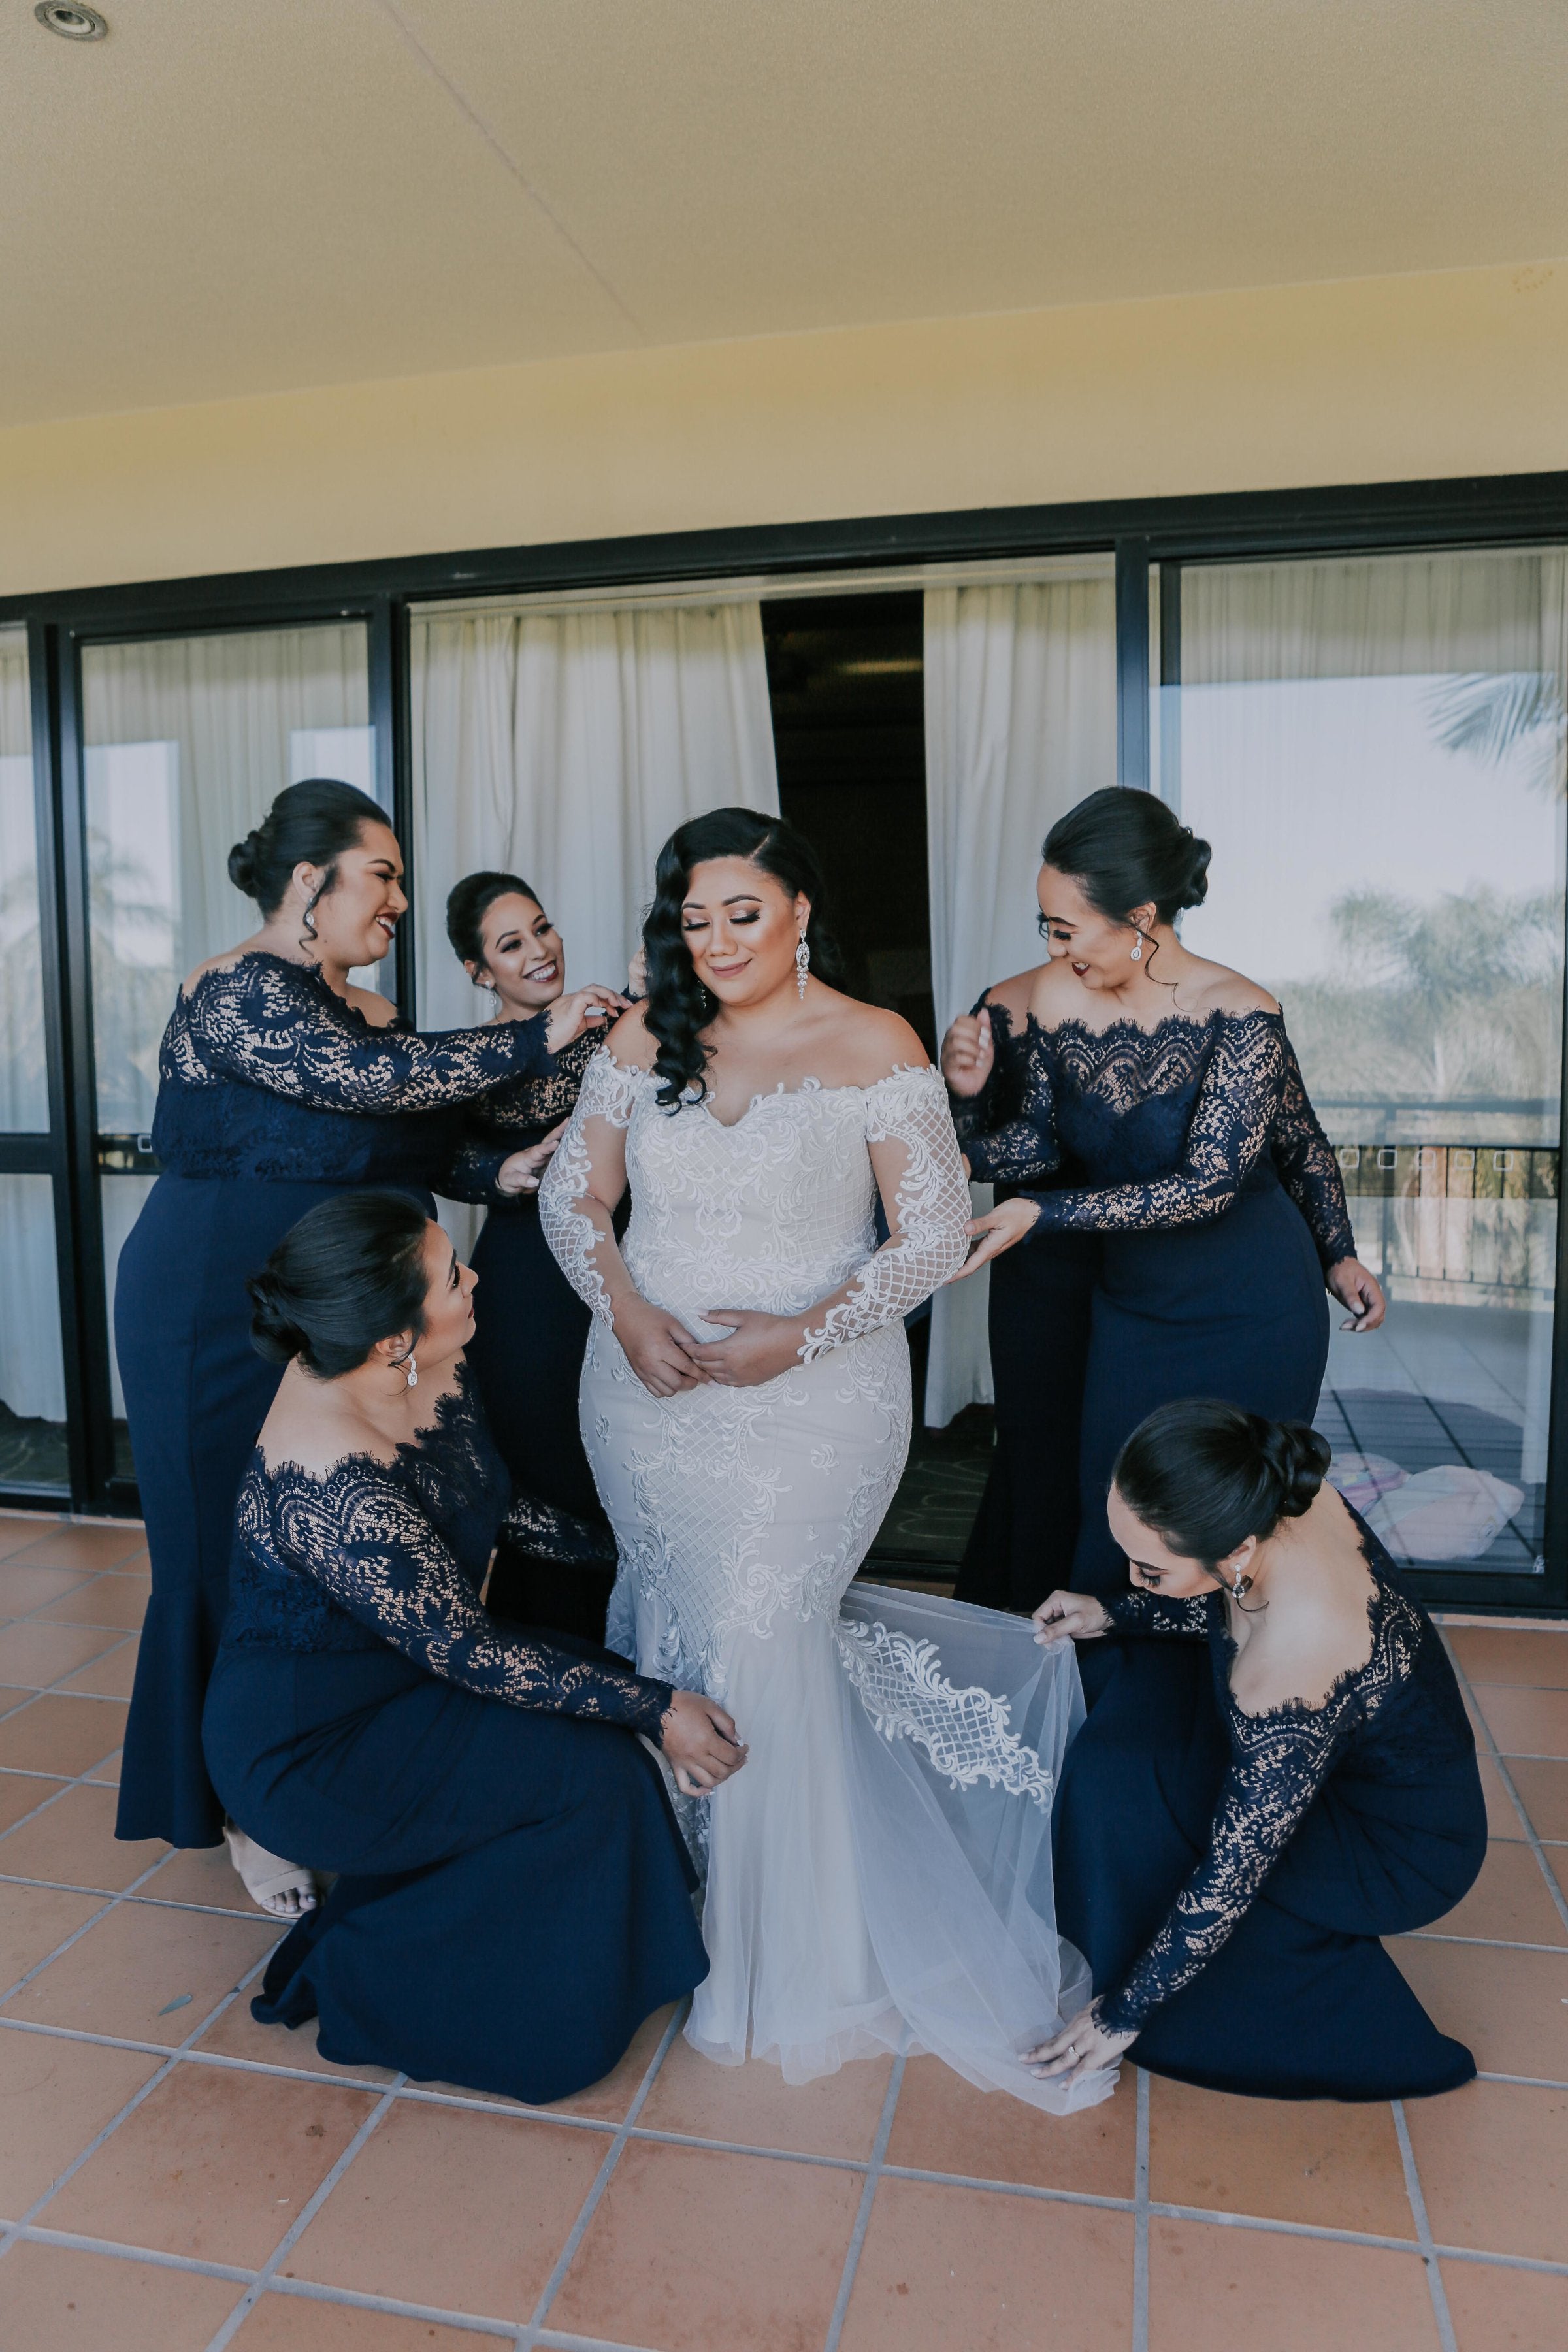 maid of honour and bridesmaids wearing black lace dresses helping bride into her wedding gown